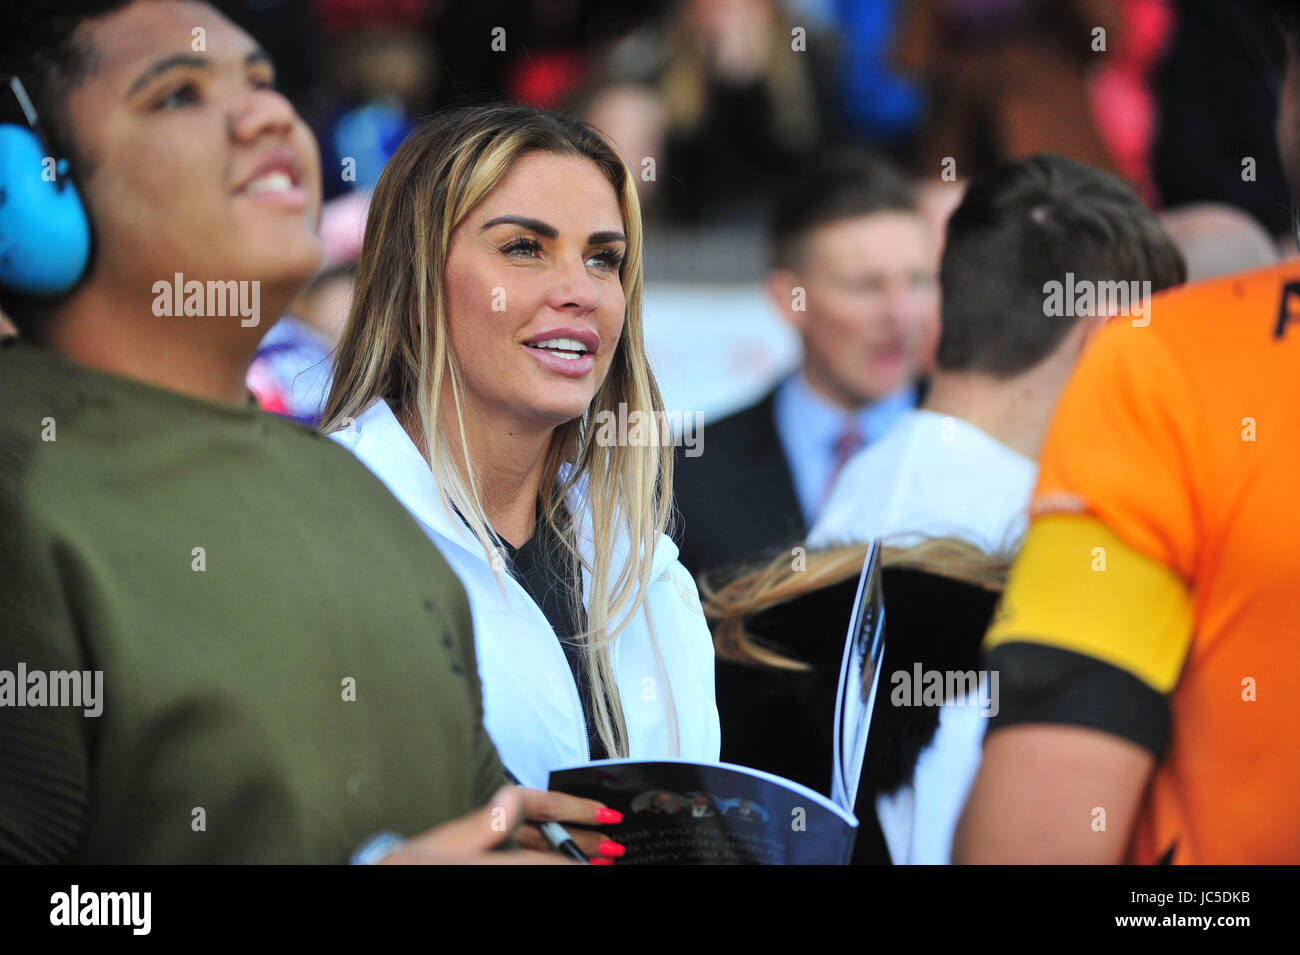 Celebrities attend a charity match held at Walsall FC in aid of Compton hospice.  Featuring: Katie Price, Harvey, Junior Where: Liverpool, United Kingdom When: 13 May 2017 Credit: Tim Edwards/WENN.com Stock Photo